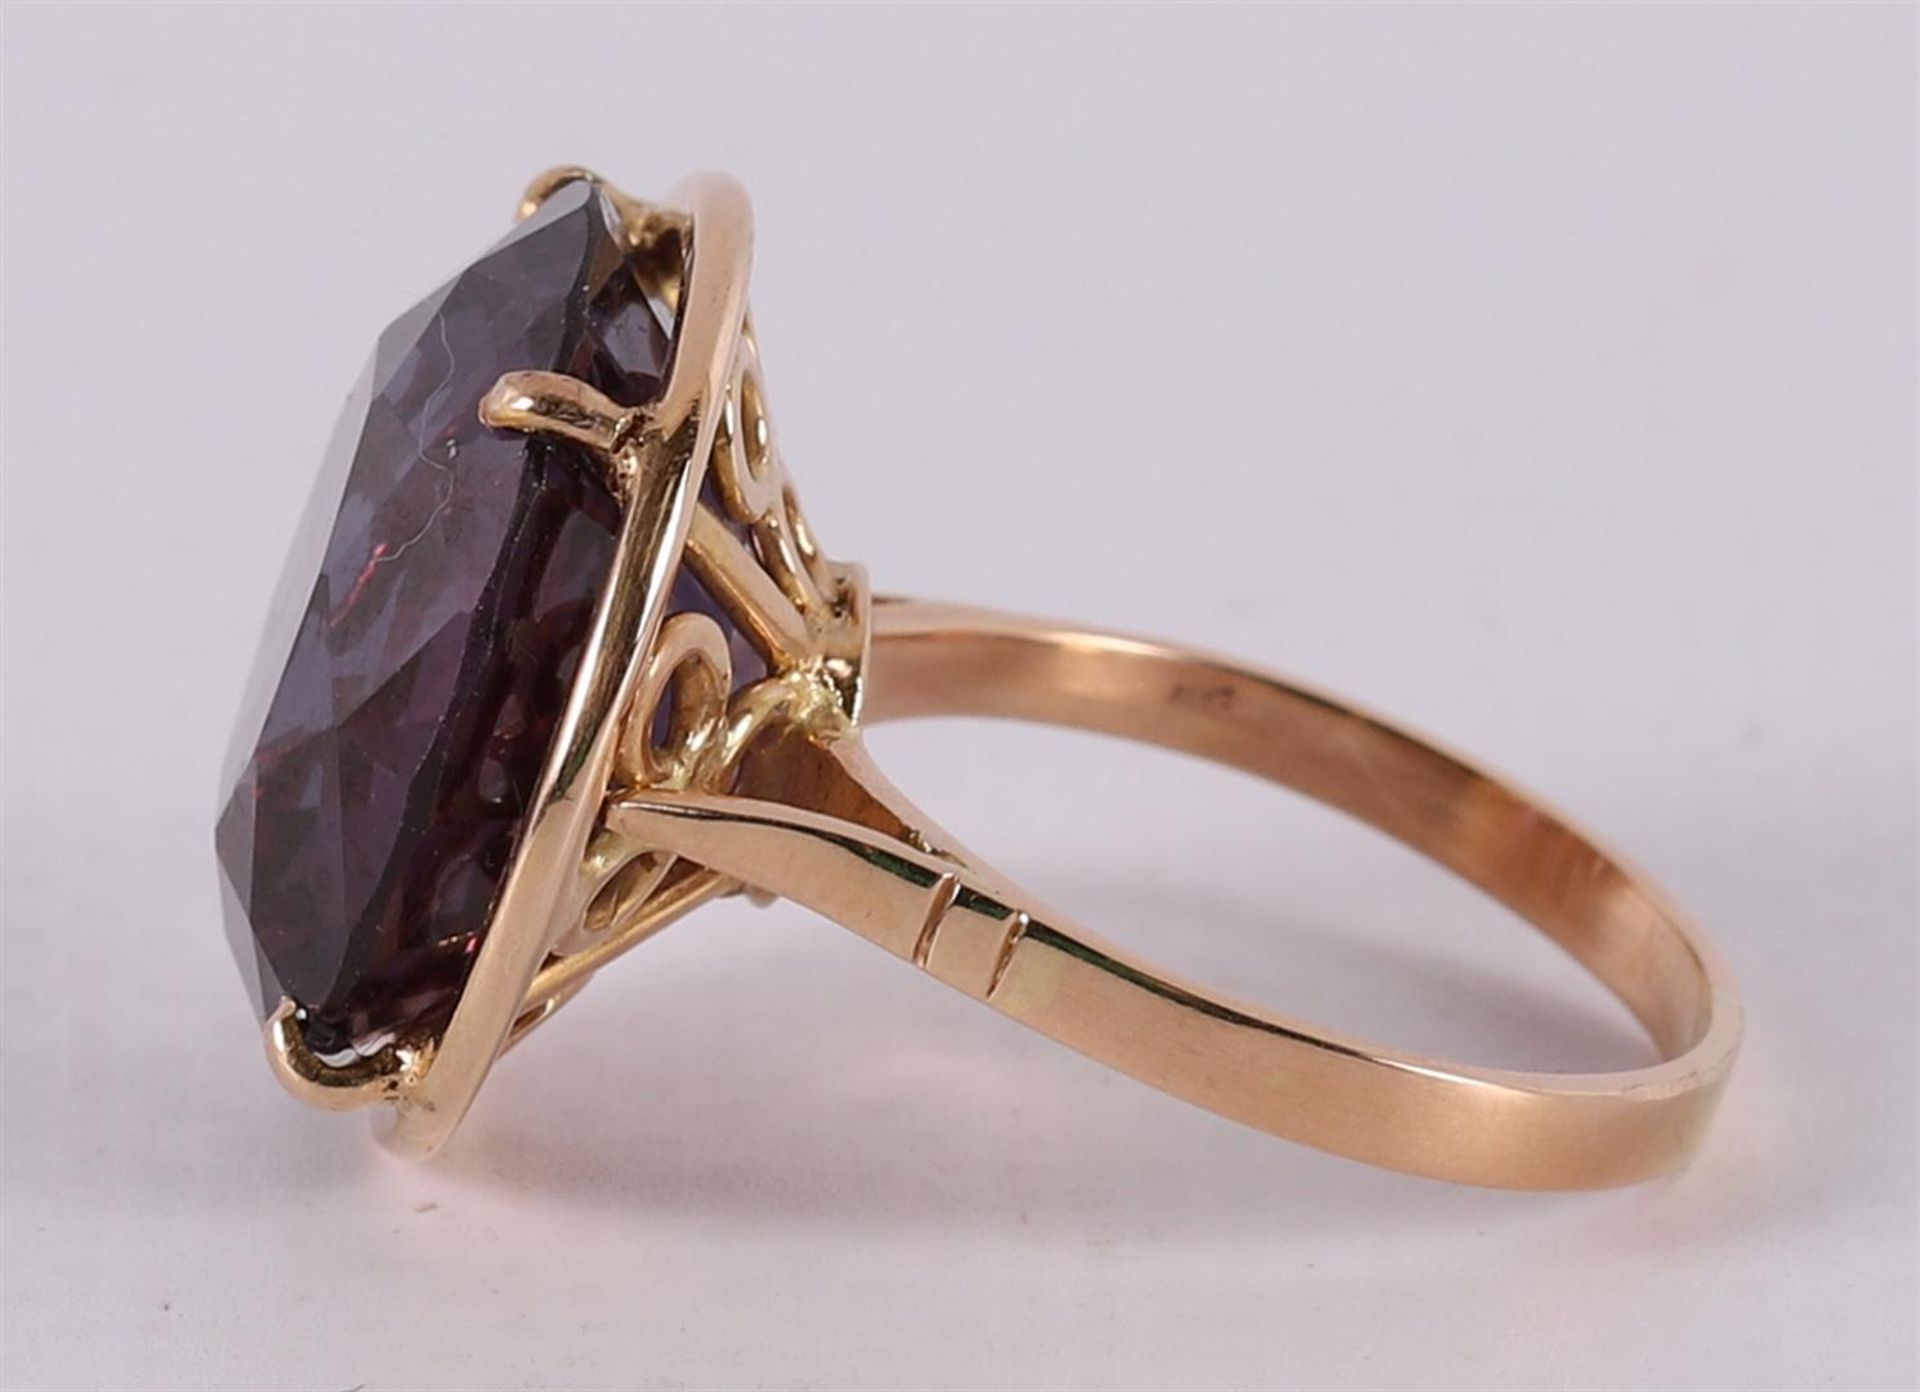 A 14 kt gold ring set with faceted colored stones. - Image 2 of 3